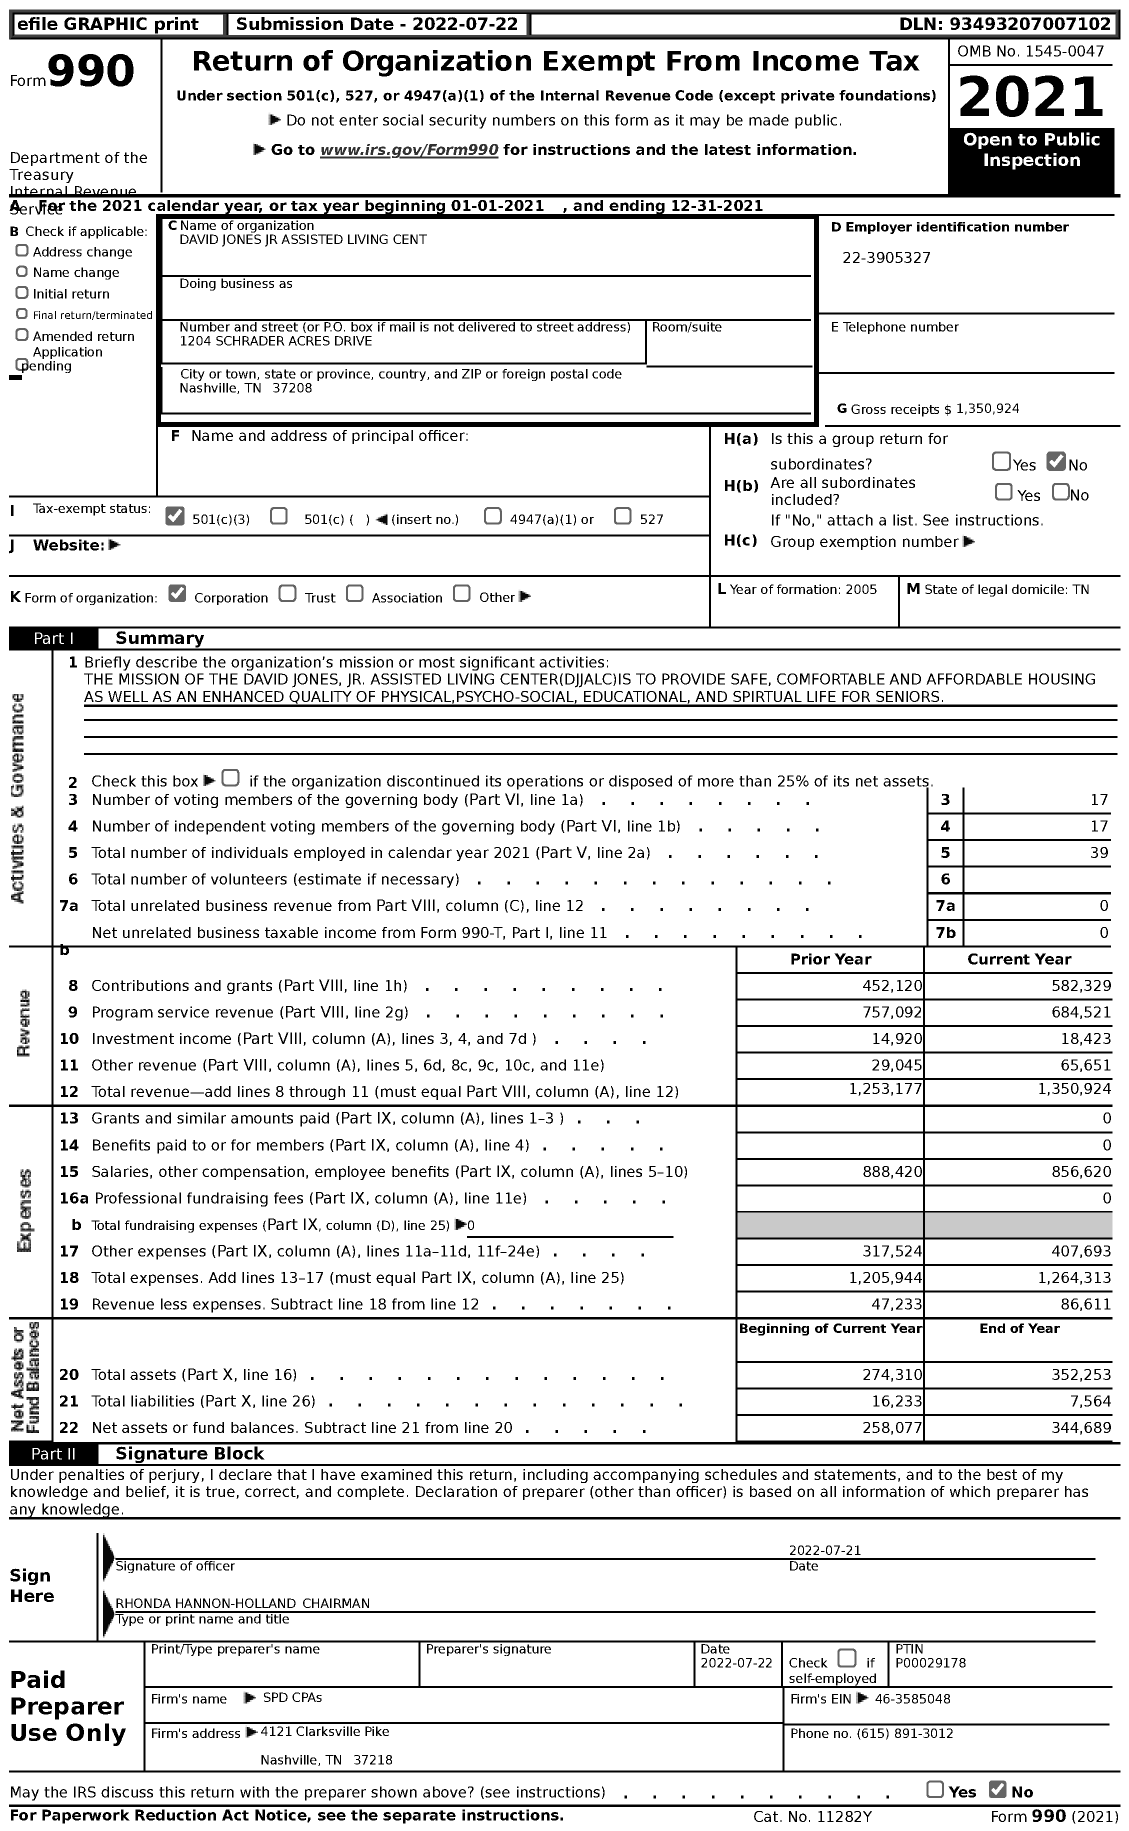 Image of first page of 2021 Form 990 for David Jones JR Assisted Living Center